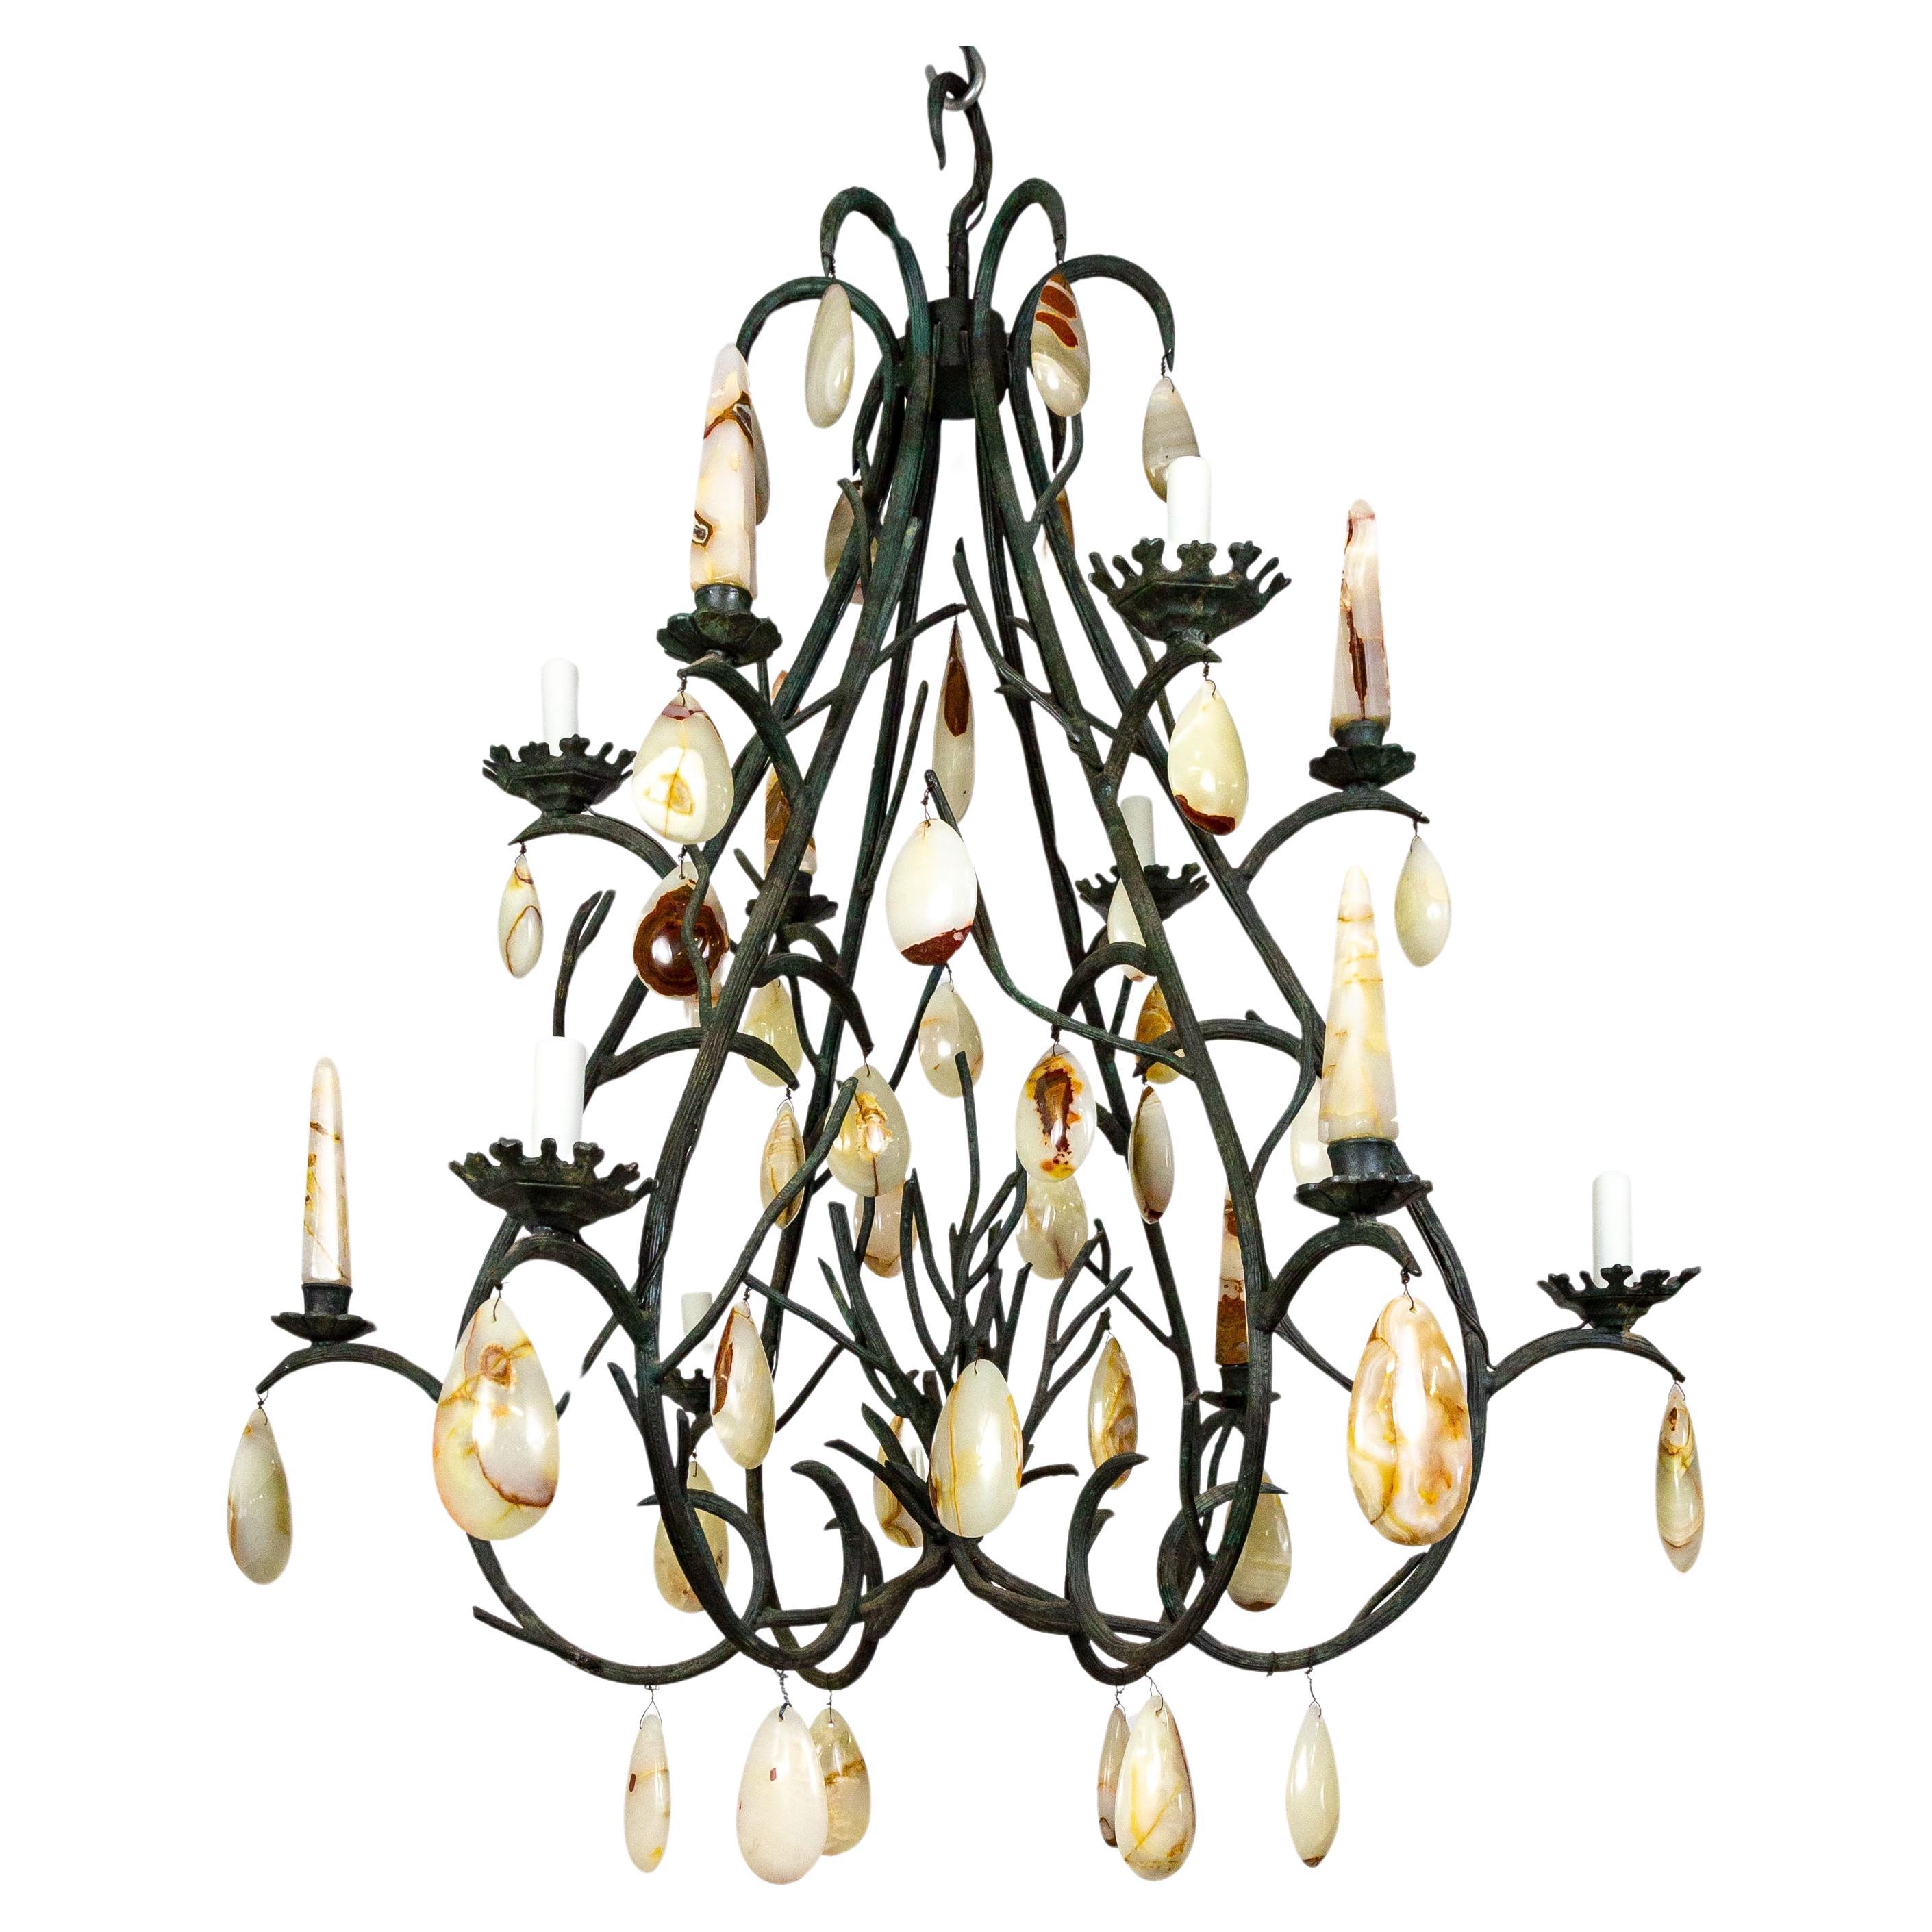 Giant Forest Green Branch Chandelier w/ Onyx Crystals by Luciano Tempo For Sale